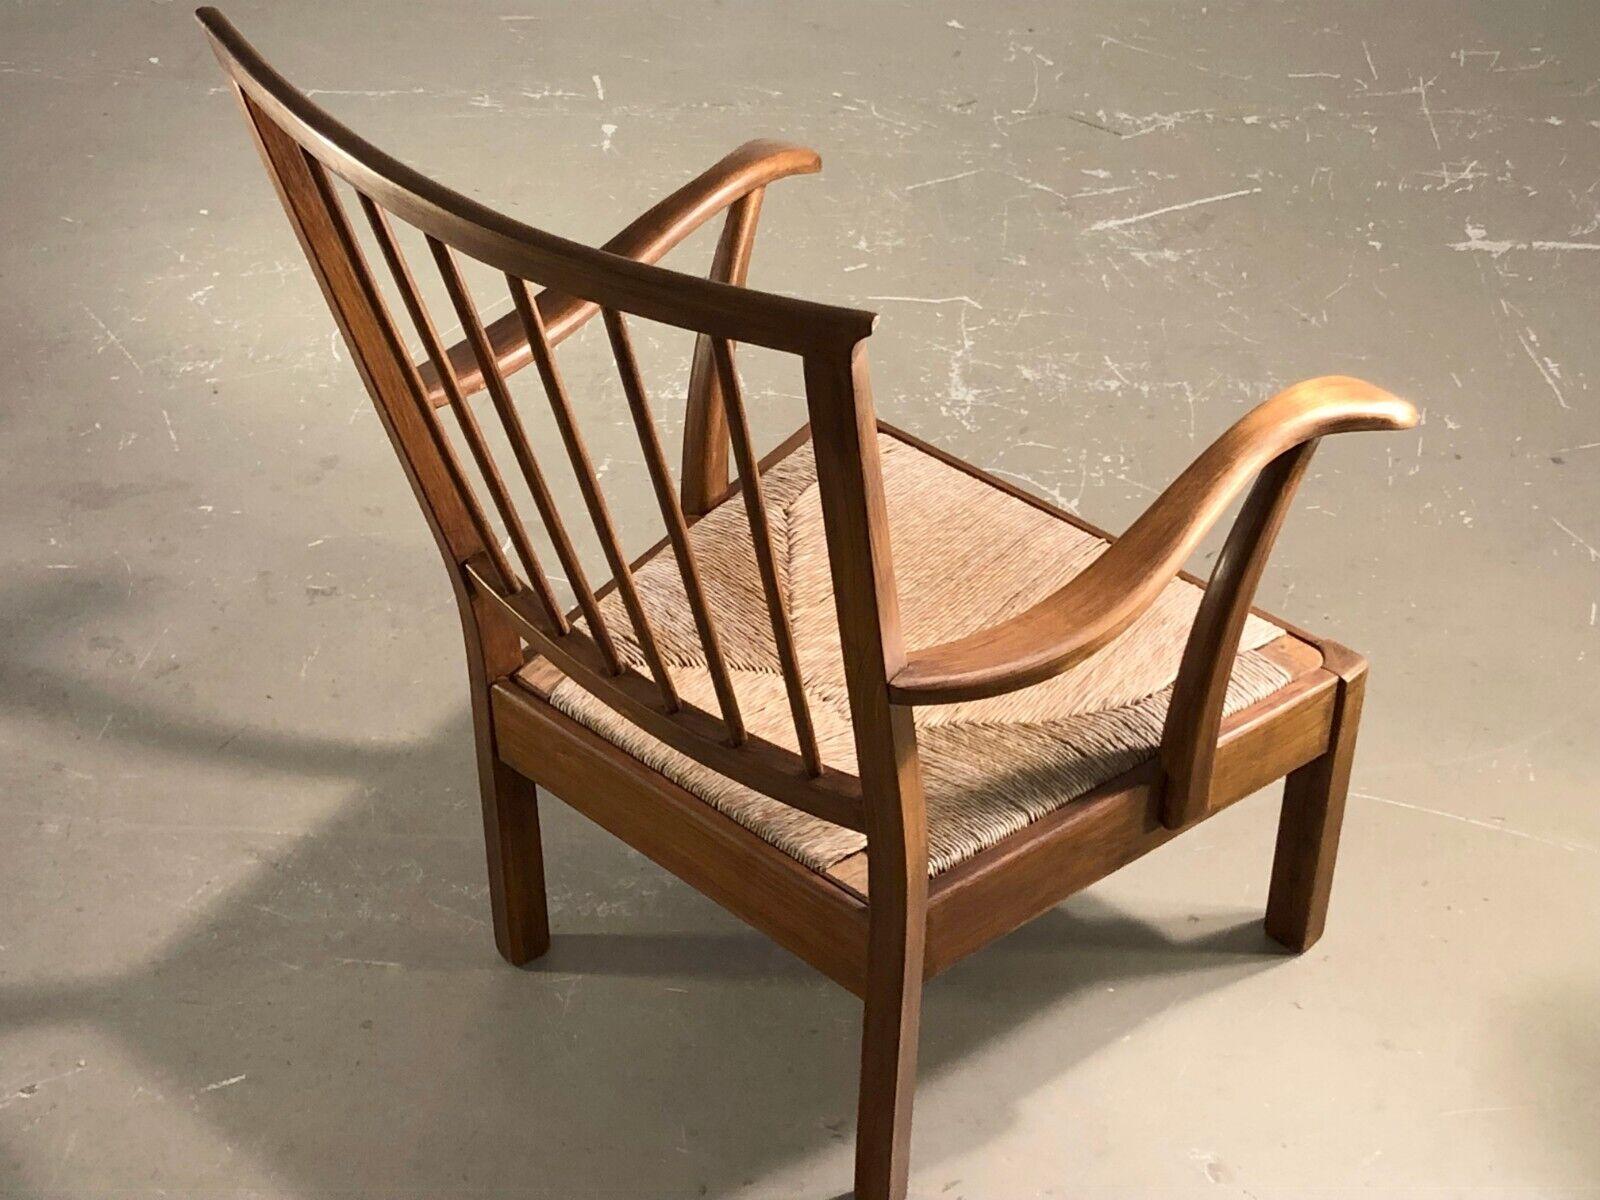 A beautiful pair of low armchairs, Rustic-Modern, Brutalist, Mid-Century Modern, Forme Libre, geometrical structures in massive cherry wood, with removable seats in straw and large aerial backrests in cherry wood, to be attributed, France